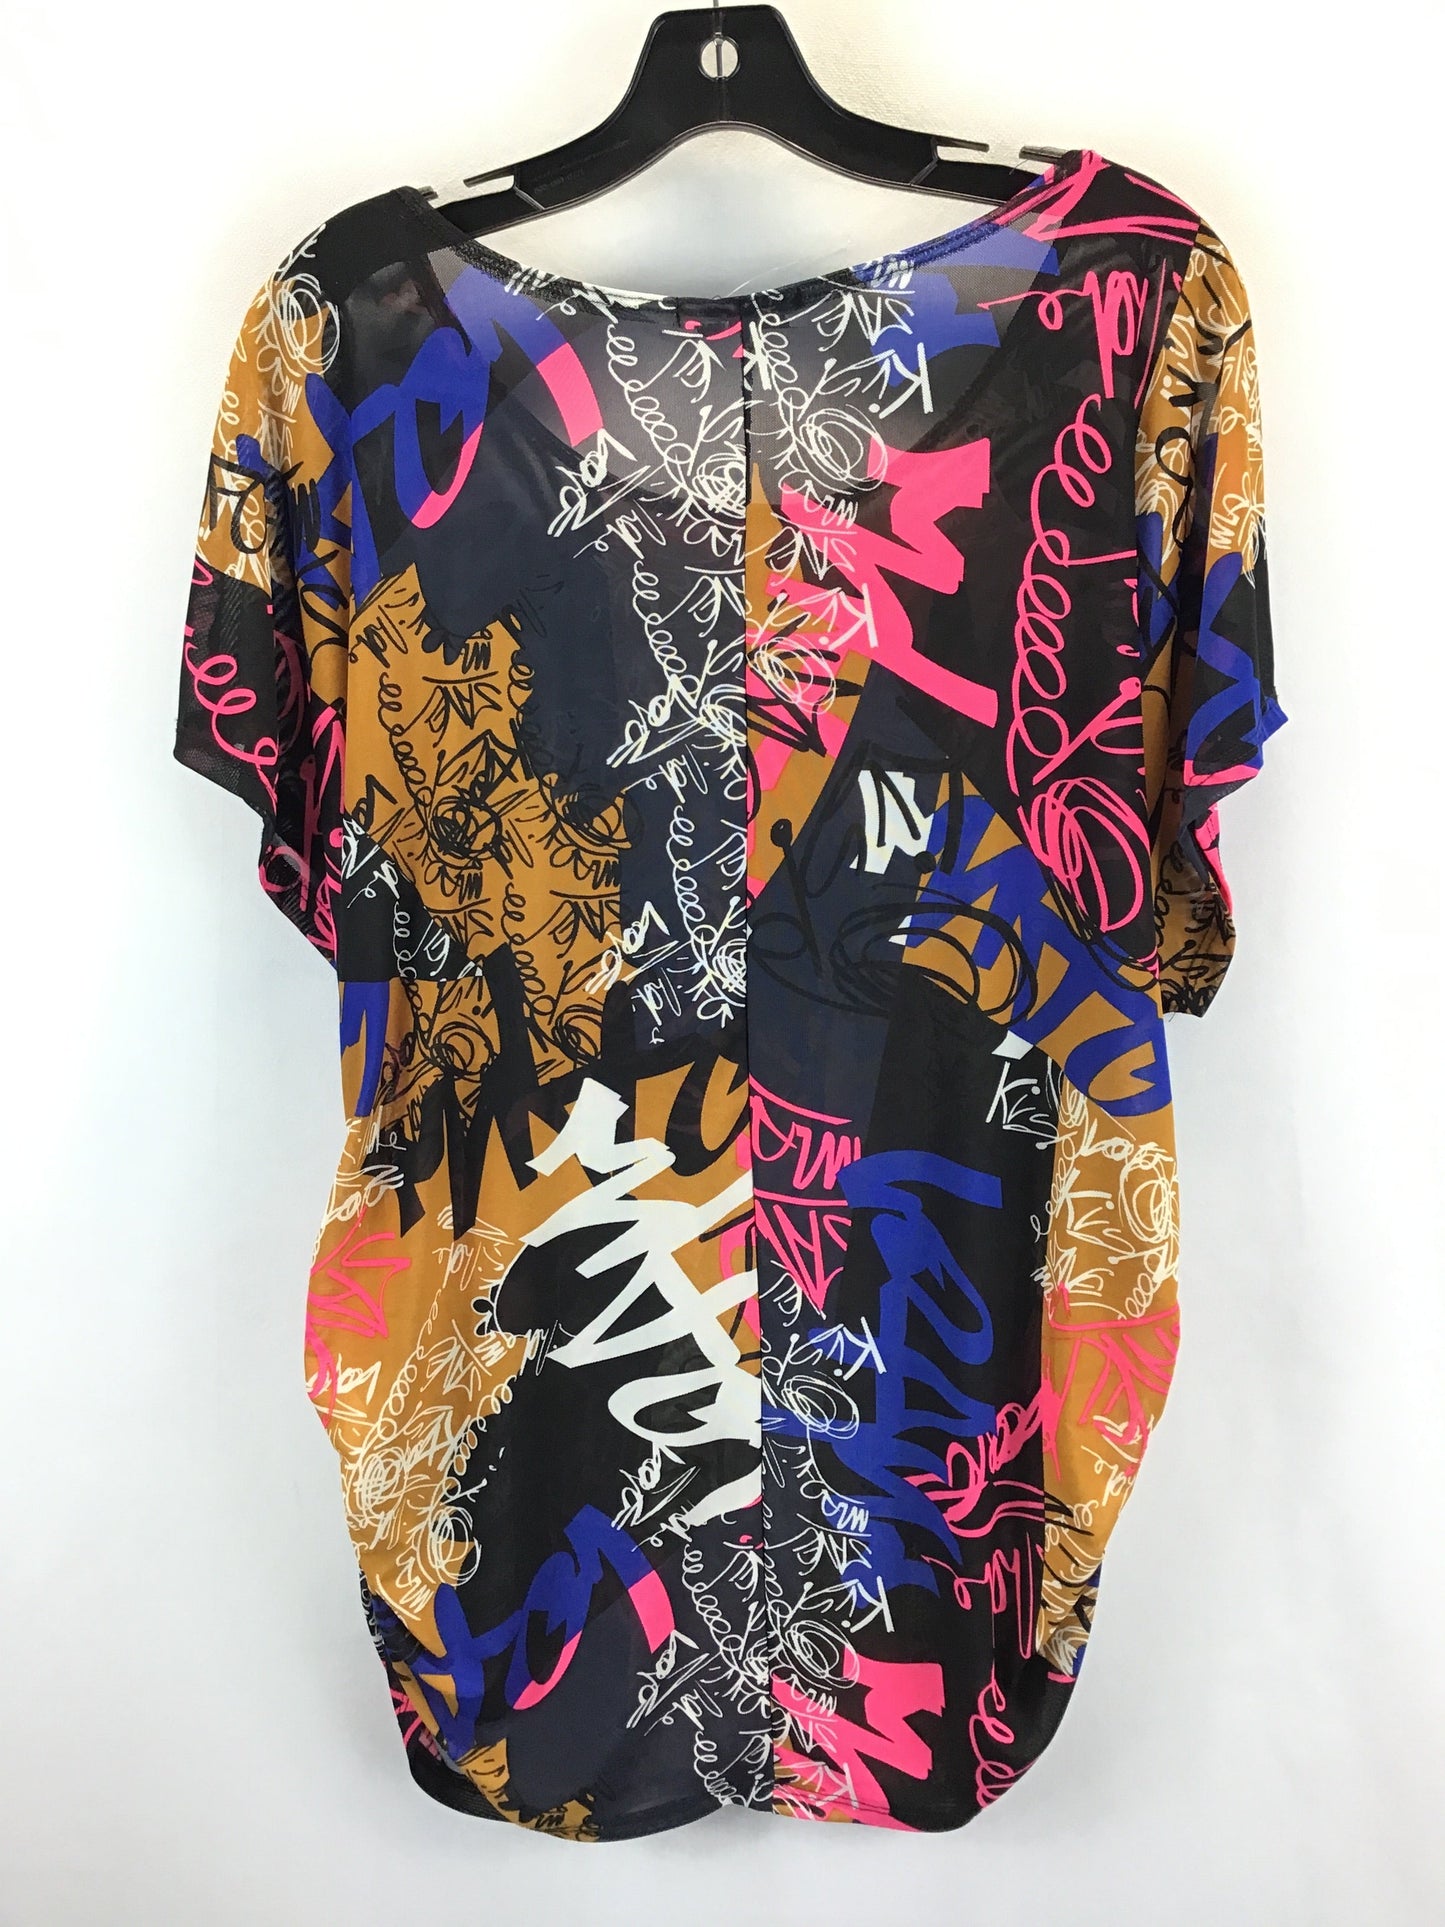 Multi-colored Top Short Sleeve Clothes Mentor, Size 3x